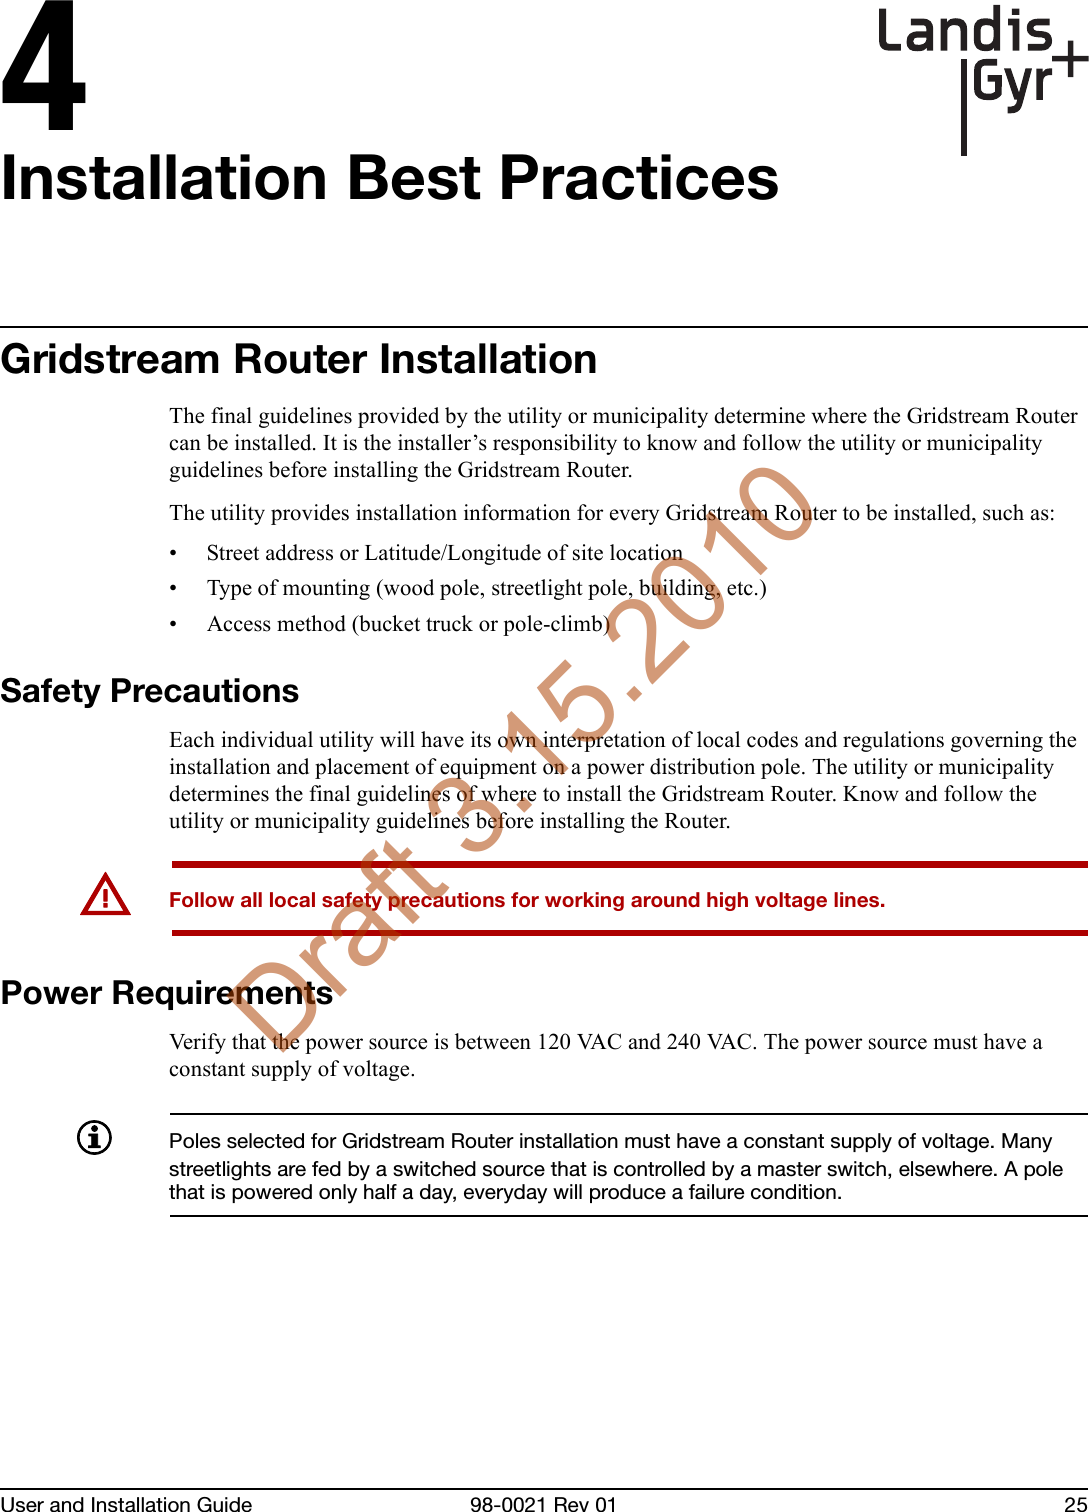 4User and Installation Guide 98-0021 Rev 01 25Installation Best PracticesGridstream Router InstallationThe final guidelines provided by the utility or municipality determine where the Gridstream Router can be installed. It is the installer’s responsibility to know and follow the utility or municipality guidelines before installing the Gridstream Router. The utility provides installation information for every Gridstream Router to be installed, such as:• Street address or Latitude/Longitude of site location• Type of mounting (wood pole, streetlight pole, building, etc.)• Access method (bucket truck or pole-climb)Safety PrecautionsEach individual utility will have its own interpretation of local codes and regulations governing the installation and placement of equipment on a power distribution pole. The utility or municipality determines the final guidelines of where to install the Gridstream Router. Know and follow the utility or municipality guidelines before installing the Router.UFollow all local safety precautions for working around high voltage lines.Power RequirementsVerify that the power source is between 120 VAC and 240 VAC. The power source must have a constant supply of voltage.Poles selected for Gridstream Router installation must have a constant supply of voltage. Many streetlights are fed by a switched source that is controlled by a master switch, elsewhere. A pole that is powered only half a day, everyday will produce a failure condition.Draft 3.15.2010